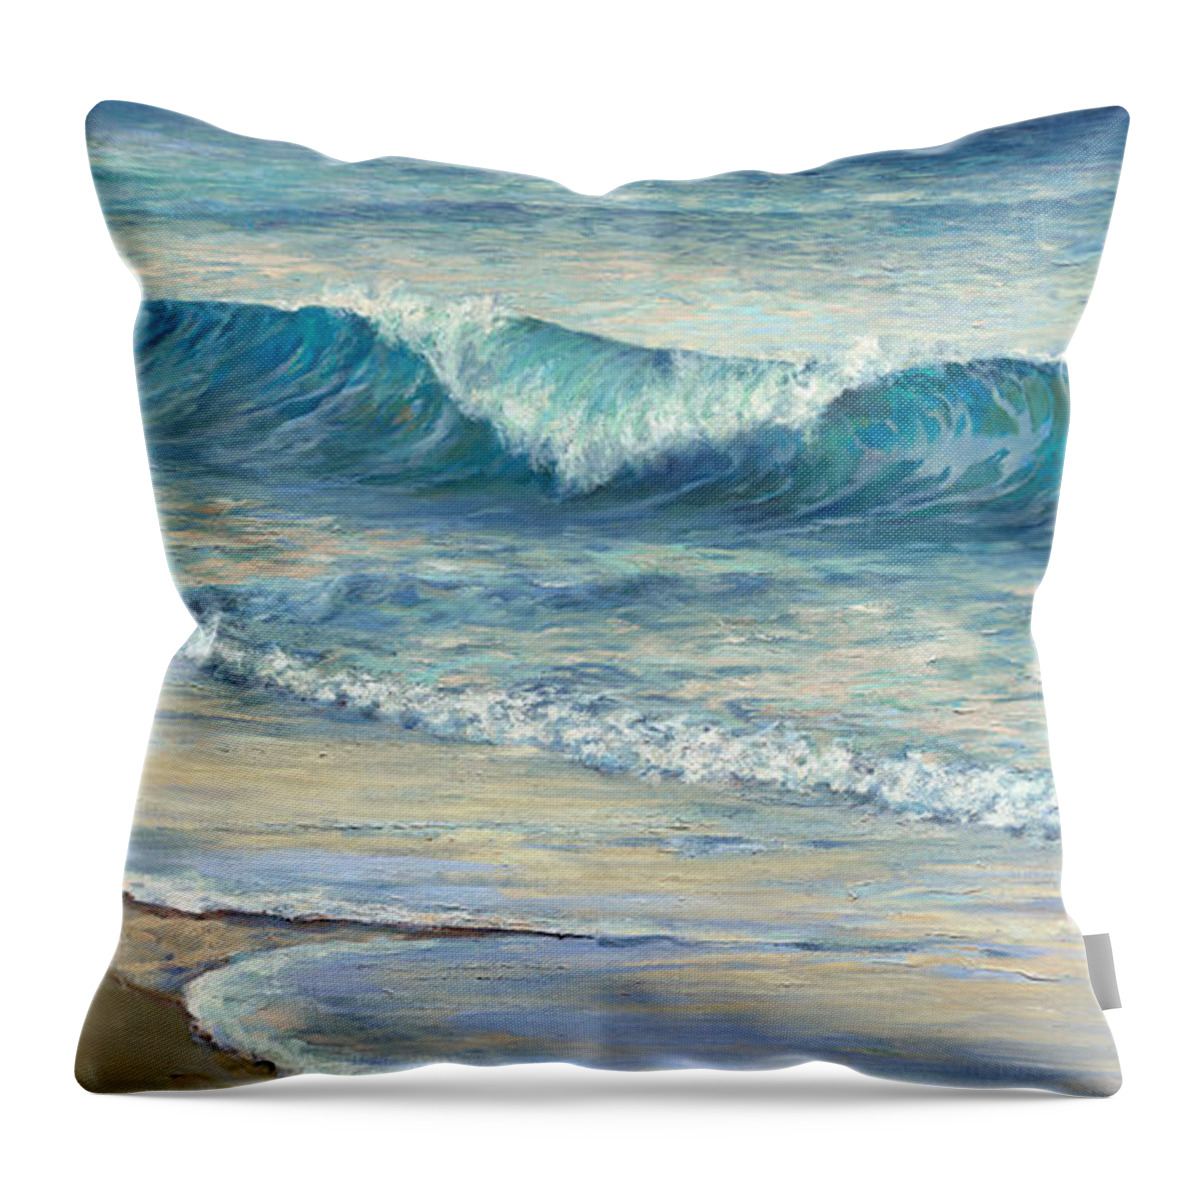 Oceans Throw Pillow featuring the painting Ride the Wave by Laurie Snow Hein